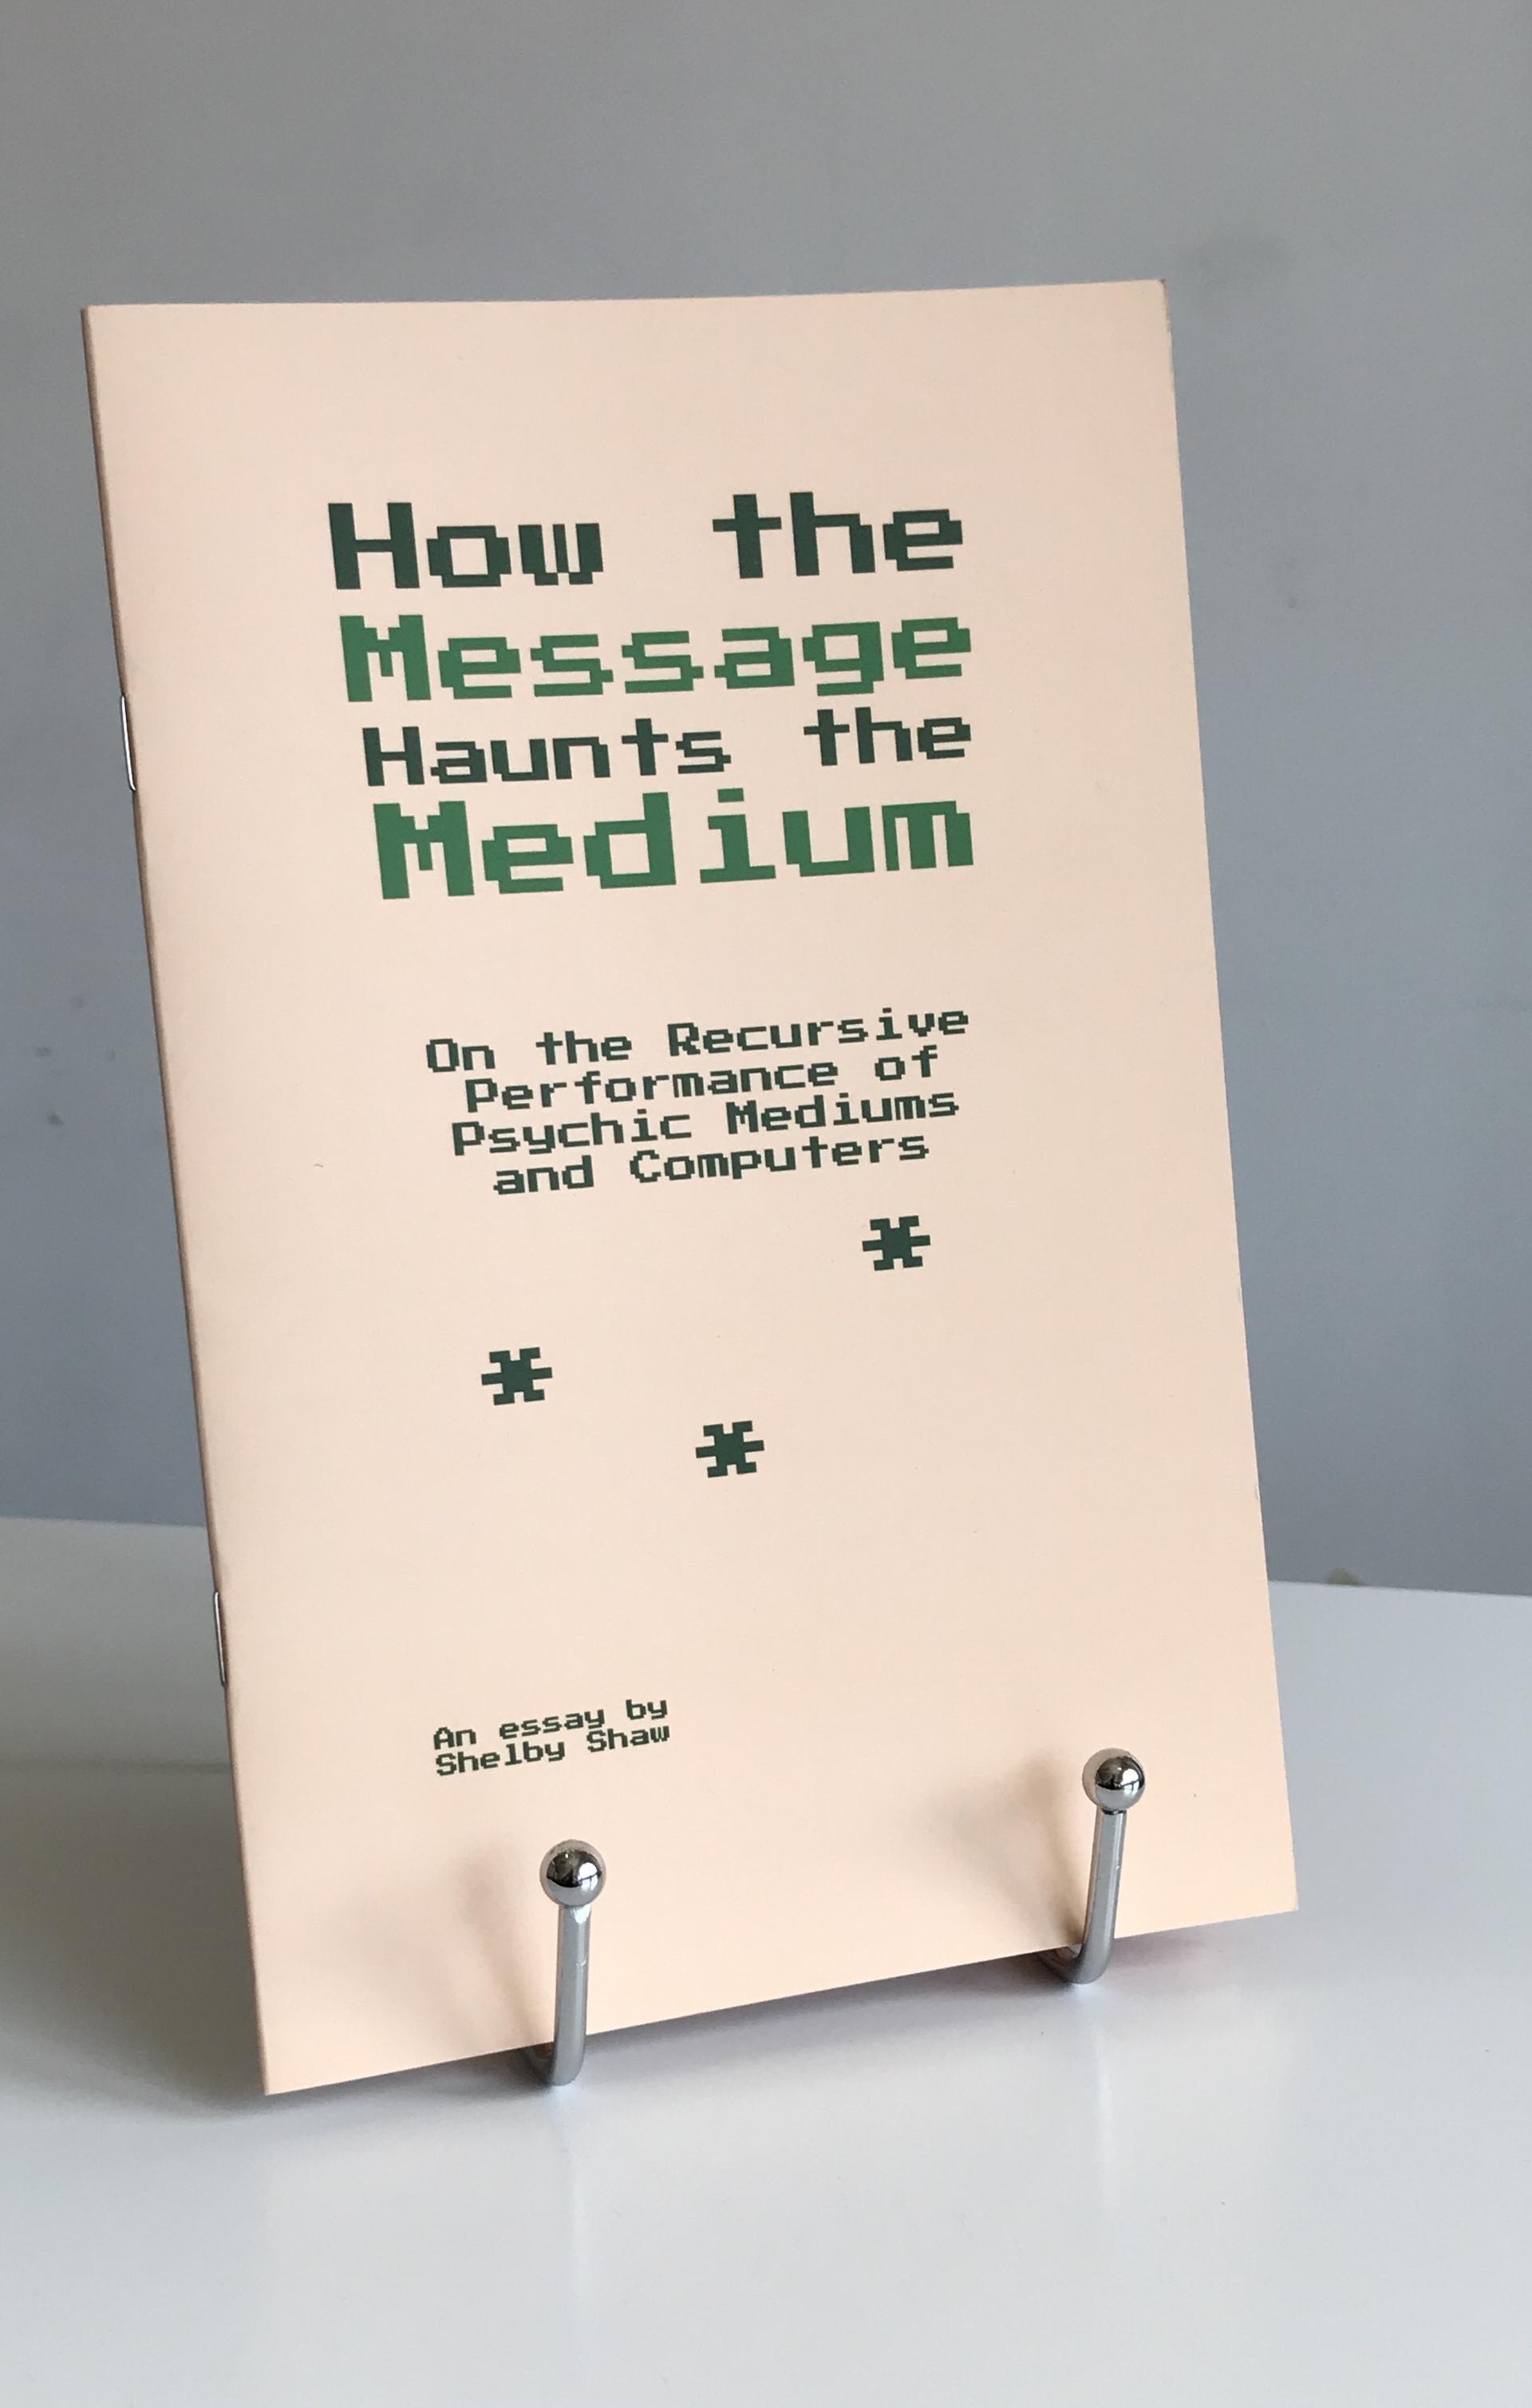 The book 'How the Message Haunts the Medium' which is peach colored with green font for the title and three large green asterisks underneath, is displayed on a silver book stand atop a white tabletop with a white wall in the background.